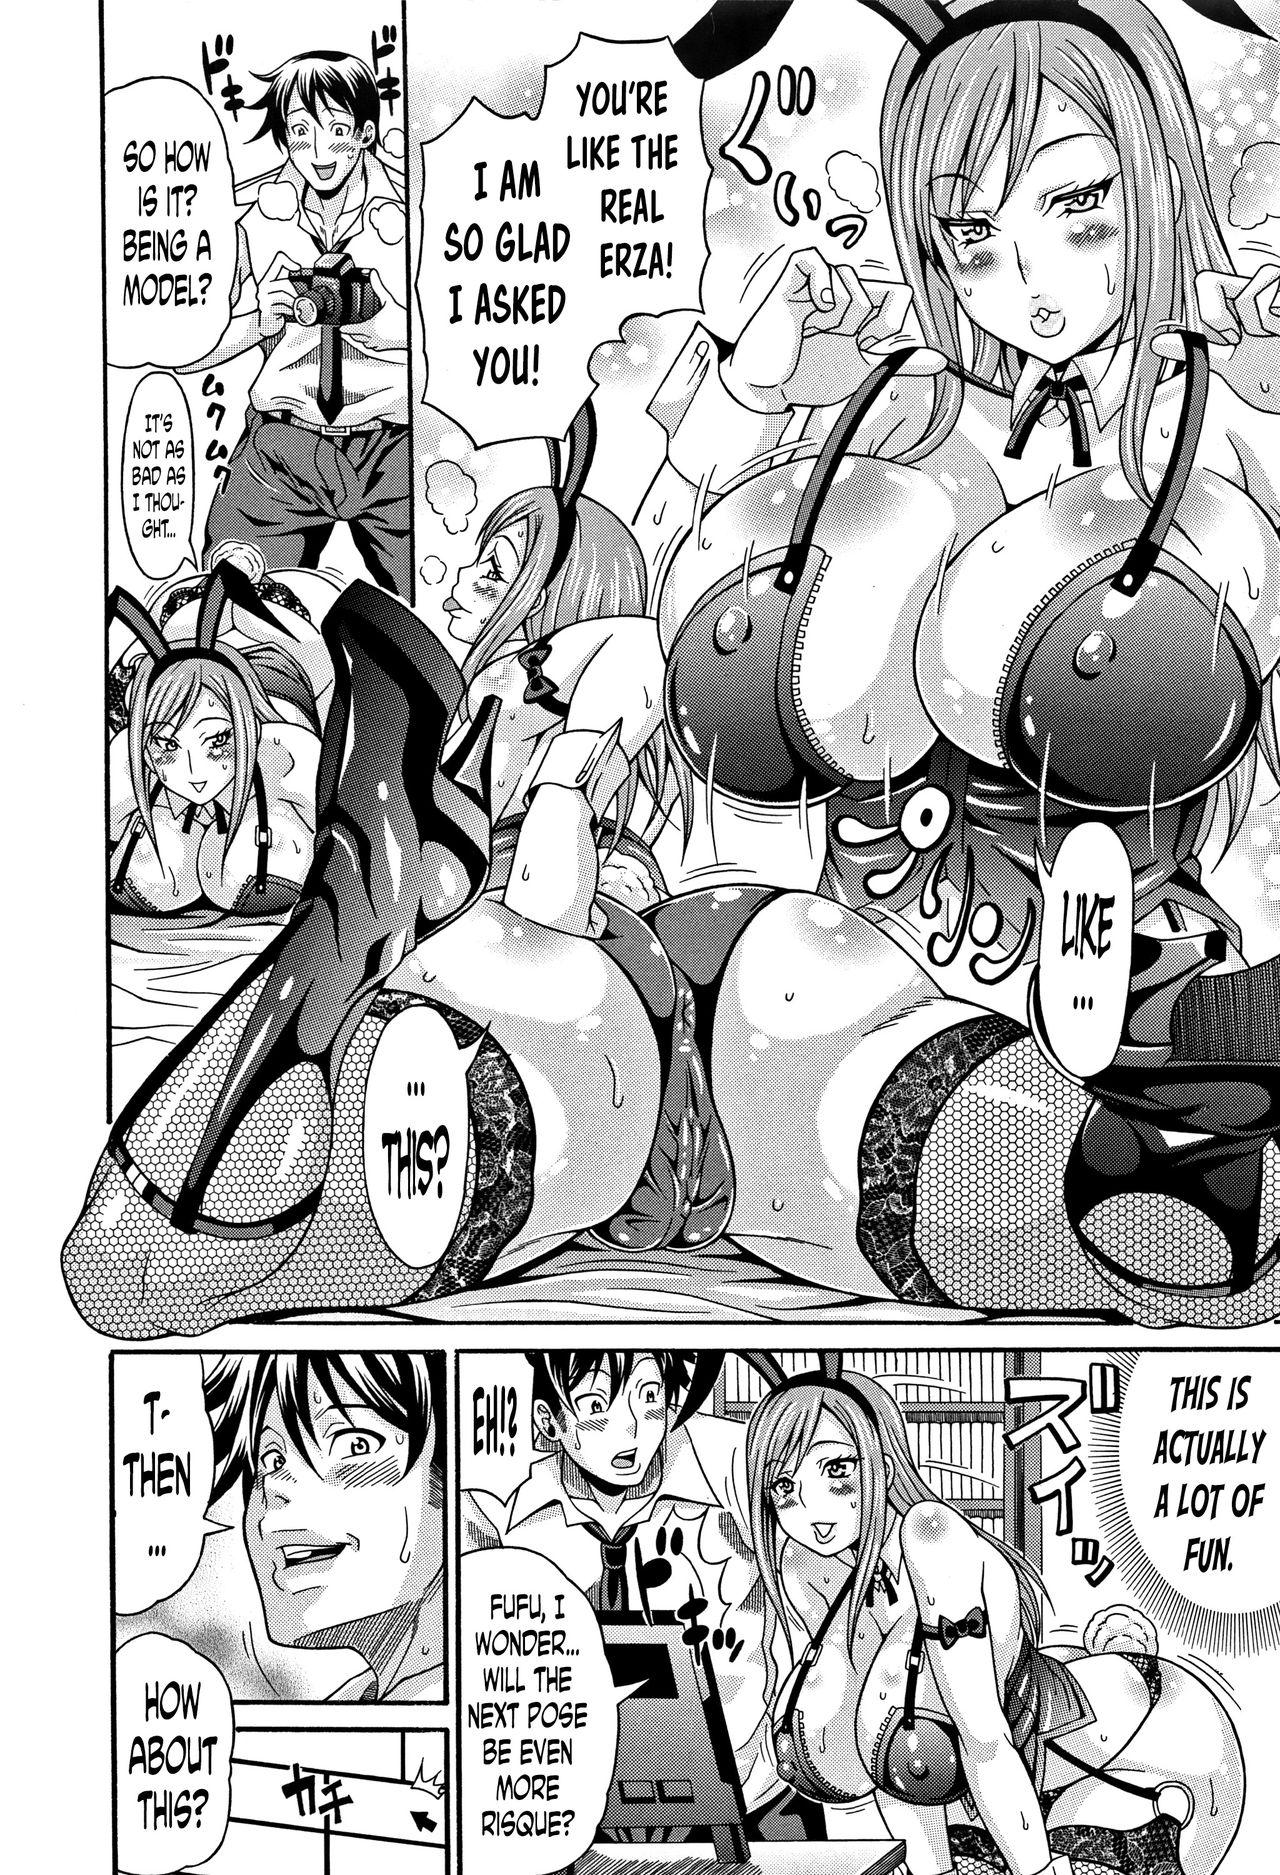 [Andou Hiroyuki] Mamire Chichi - Sticky Tits Feel Hot All Over. Ch.1-2 [English] [doujin-moe.us] 24